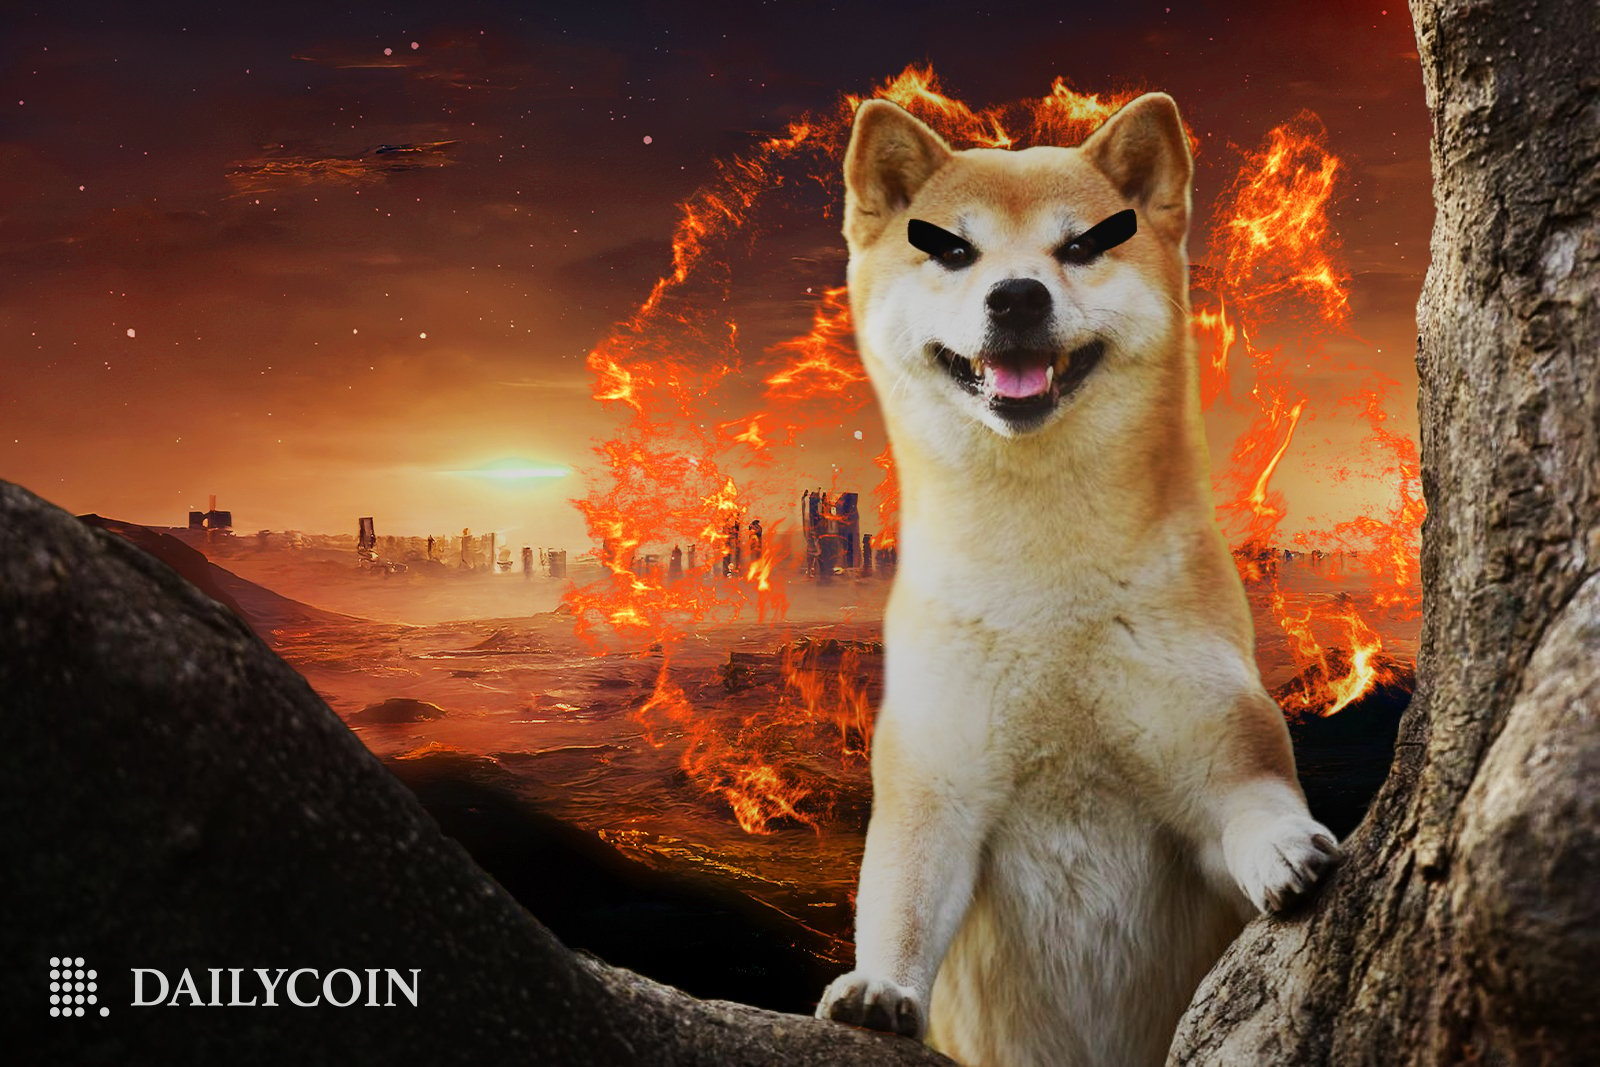 Shiba Inu dog with fox eyes and a sly smile sitting on a tree branch as Shibarium continues to burn in flames.